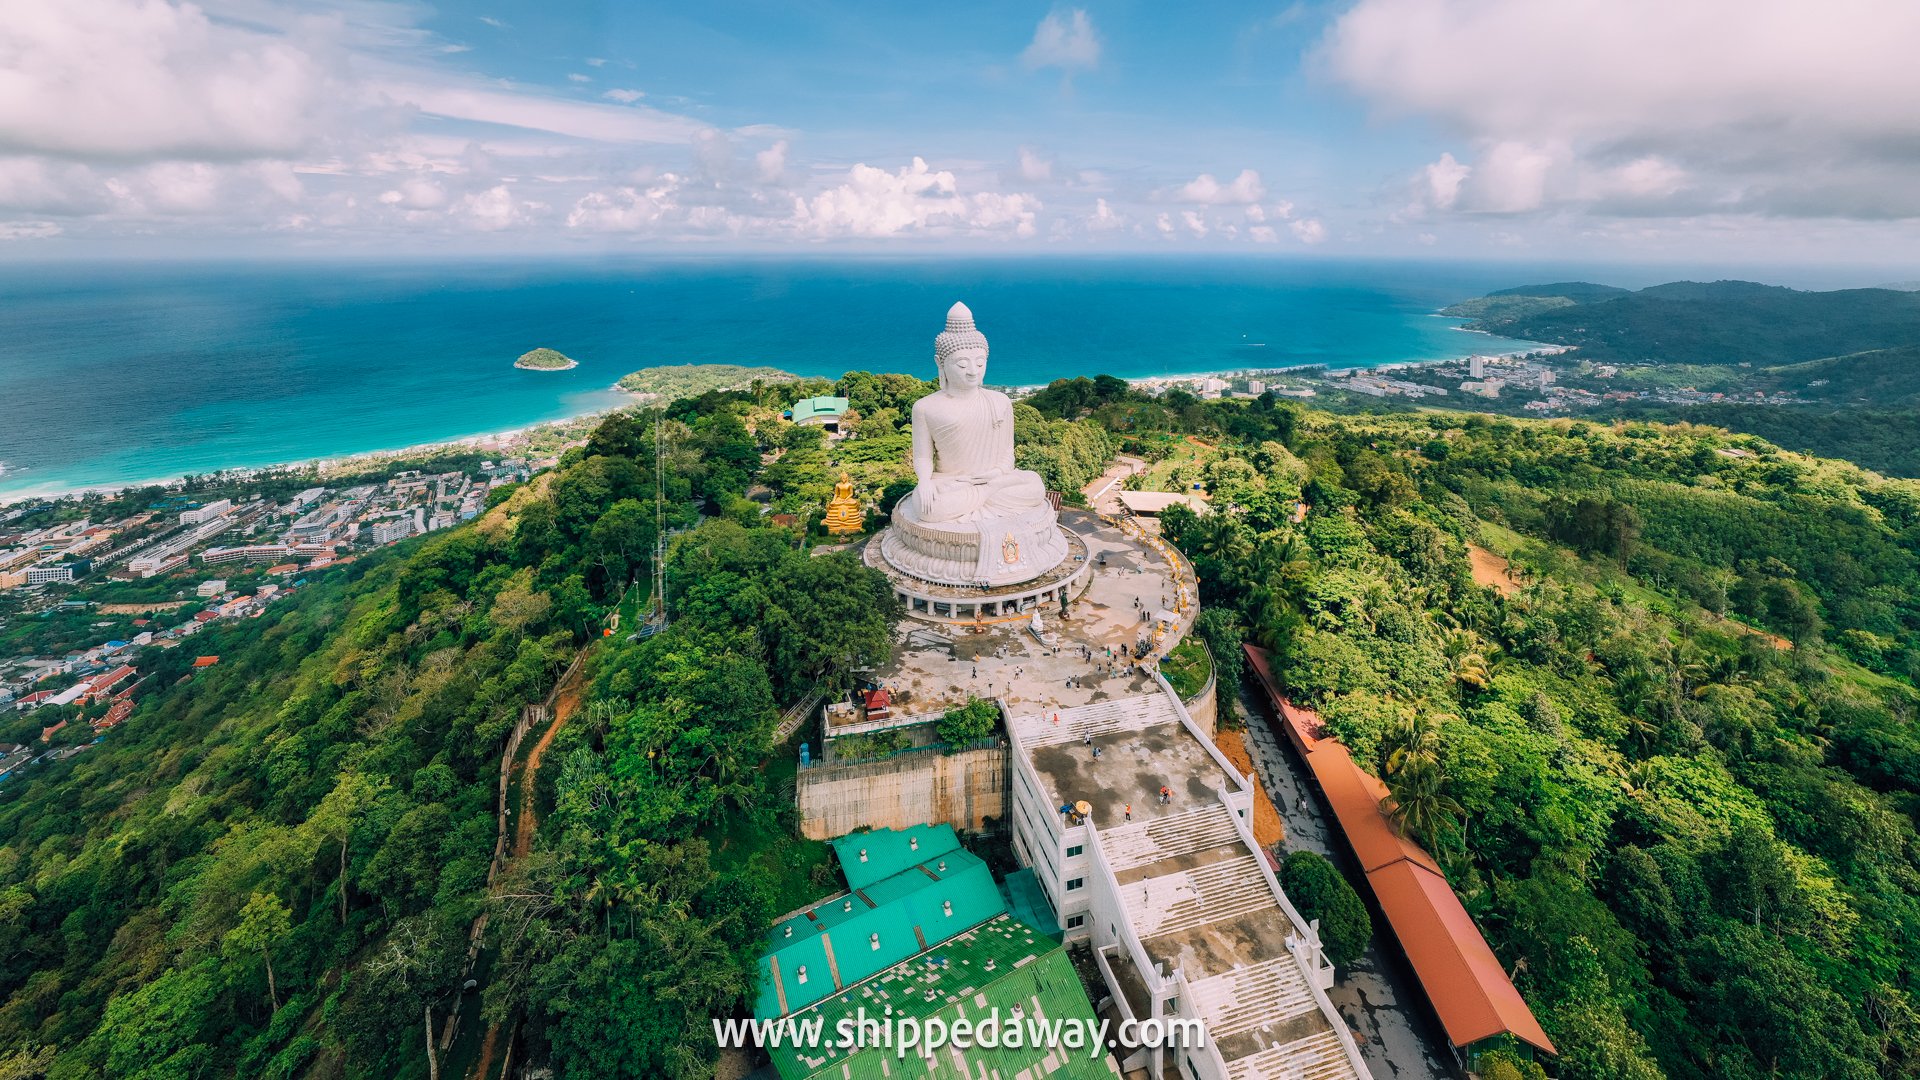 Drone aerial view of the Big Buddha in Phuket, Thailand